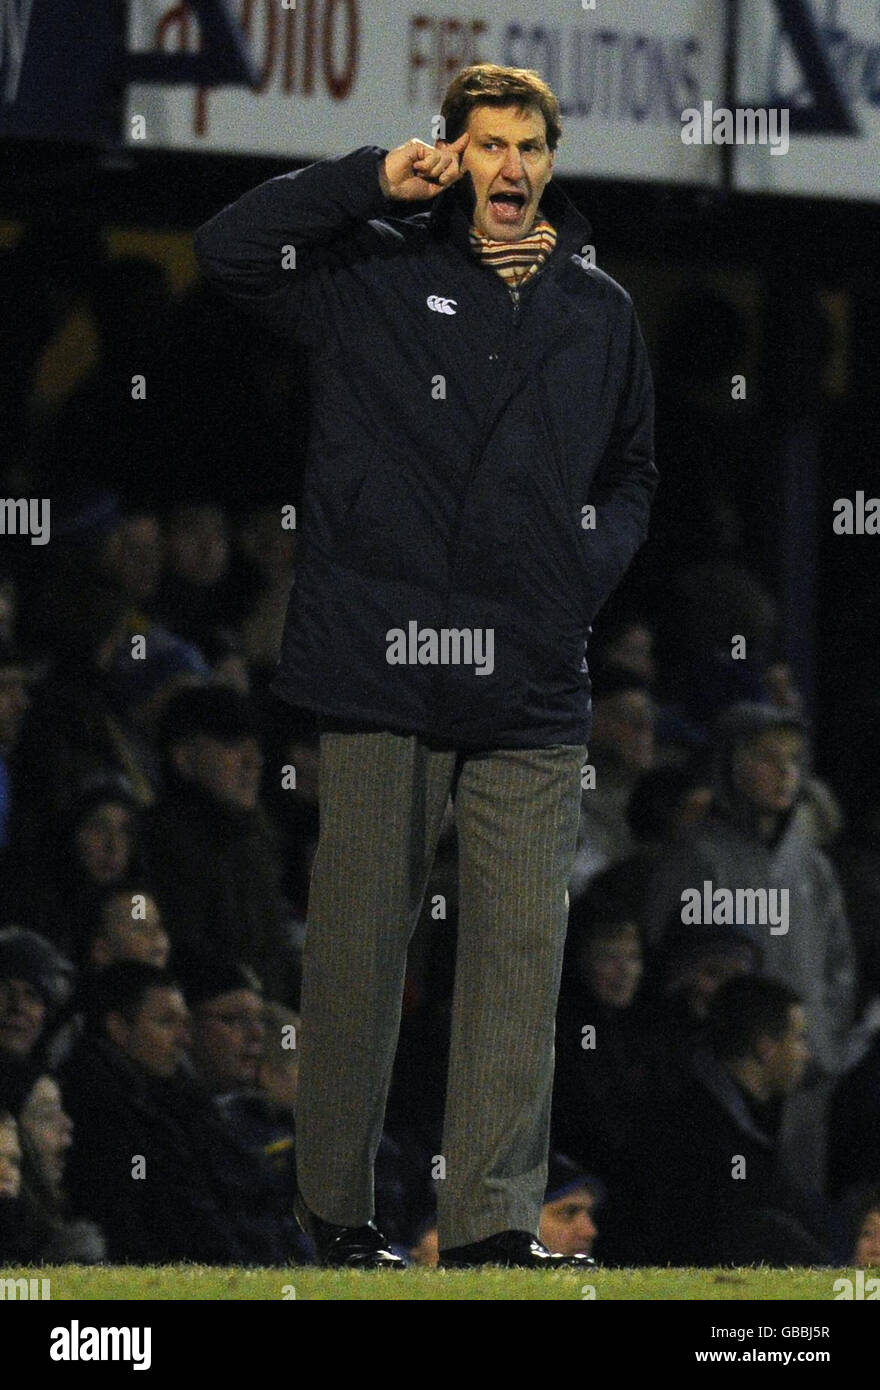 Portsmouth manager Tony Adams gestures on the touchline during the FA Cup Third Round match at Fratton Park, Portsmouth. Stock Photo